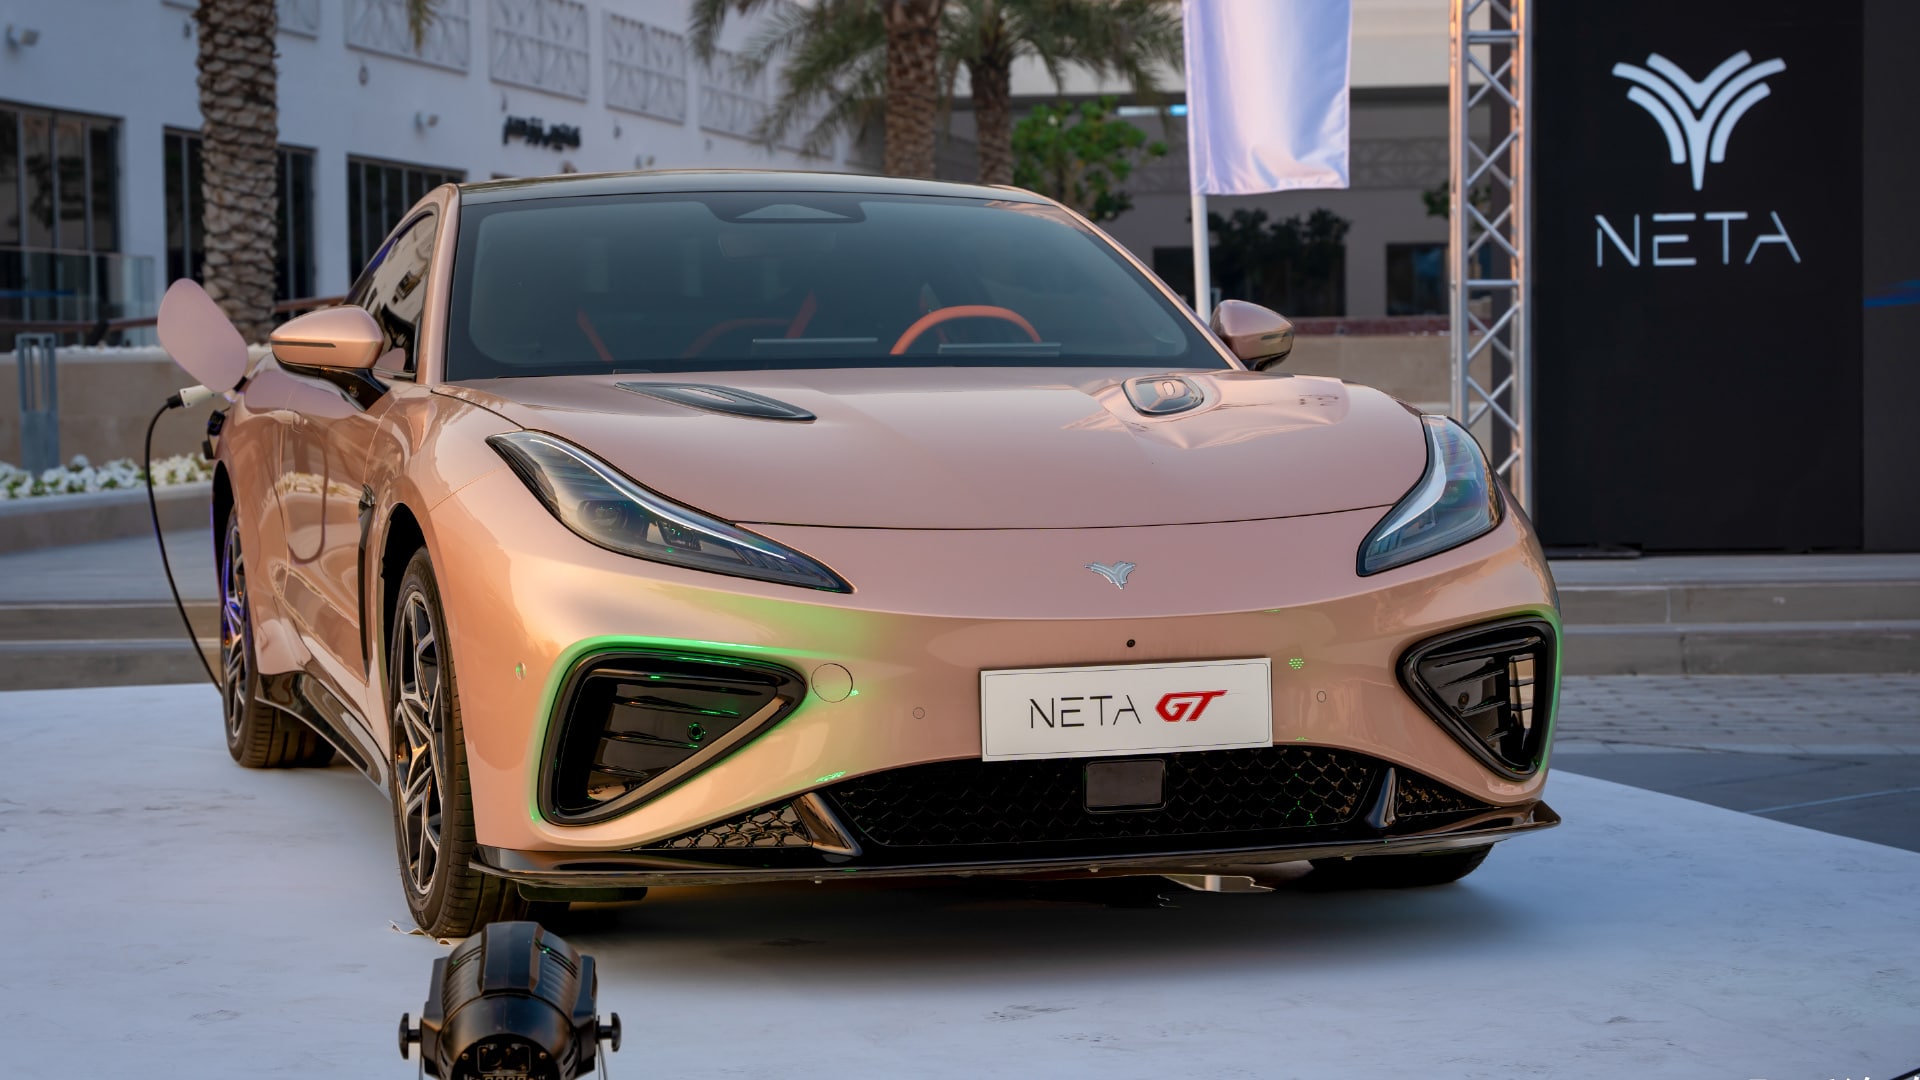 Neta displays two models in the UAE as it accelerates overseas expansion